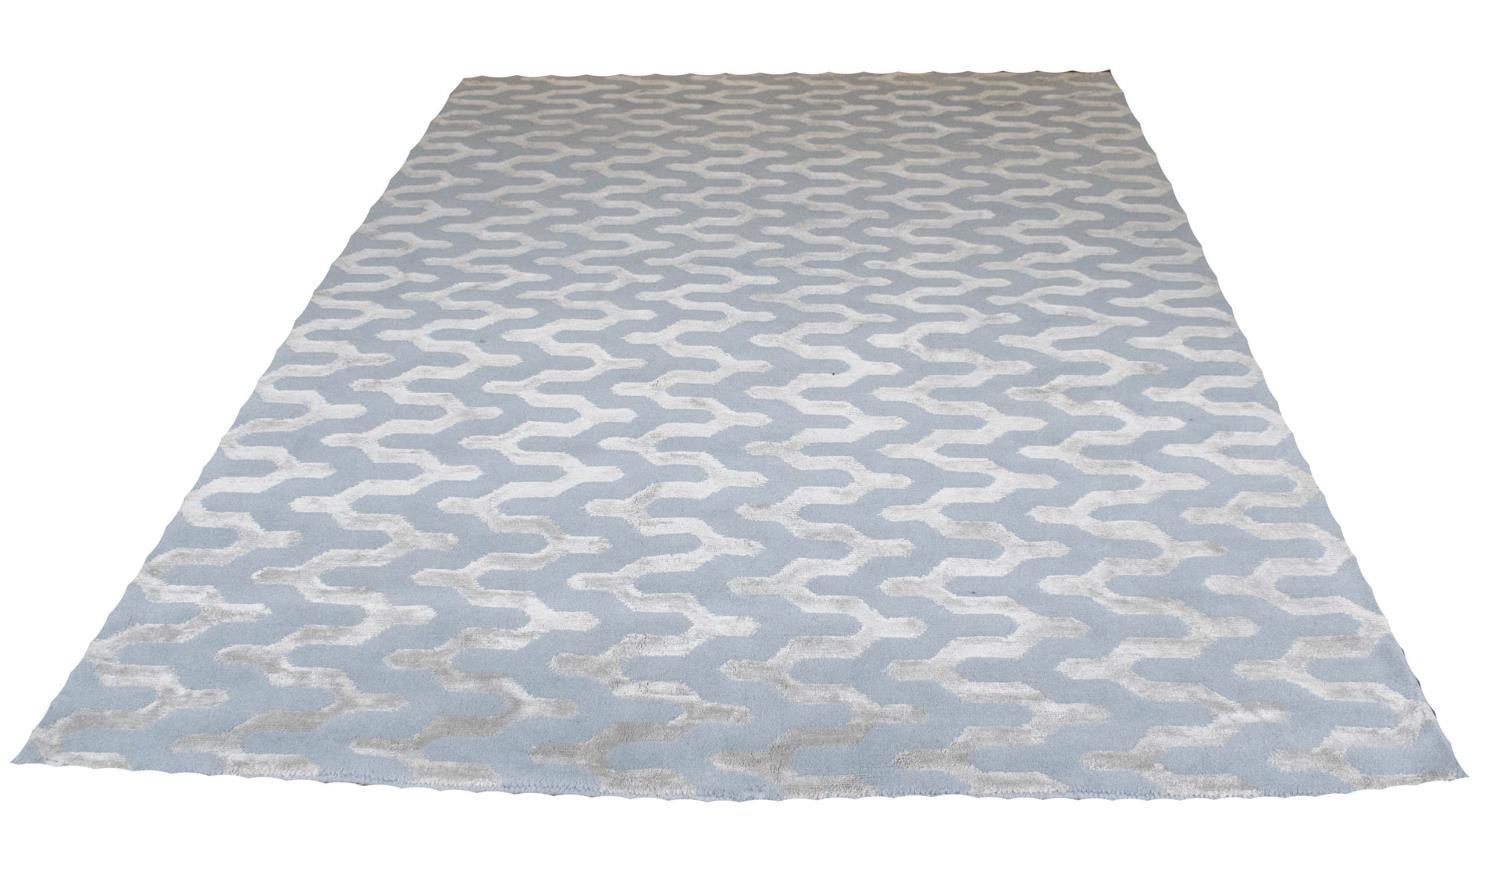 CONTEMPORARY TIGER DESIGN RUG COMPANY INSPIRED CARPET, wool and silk, 280cm x 180cm.